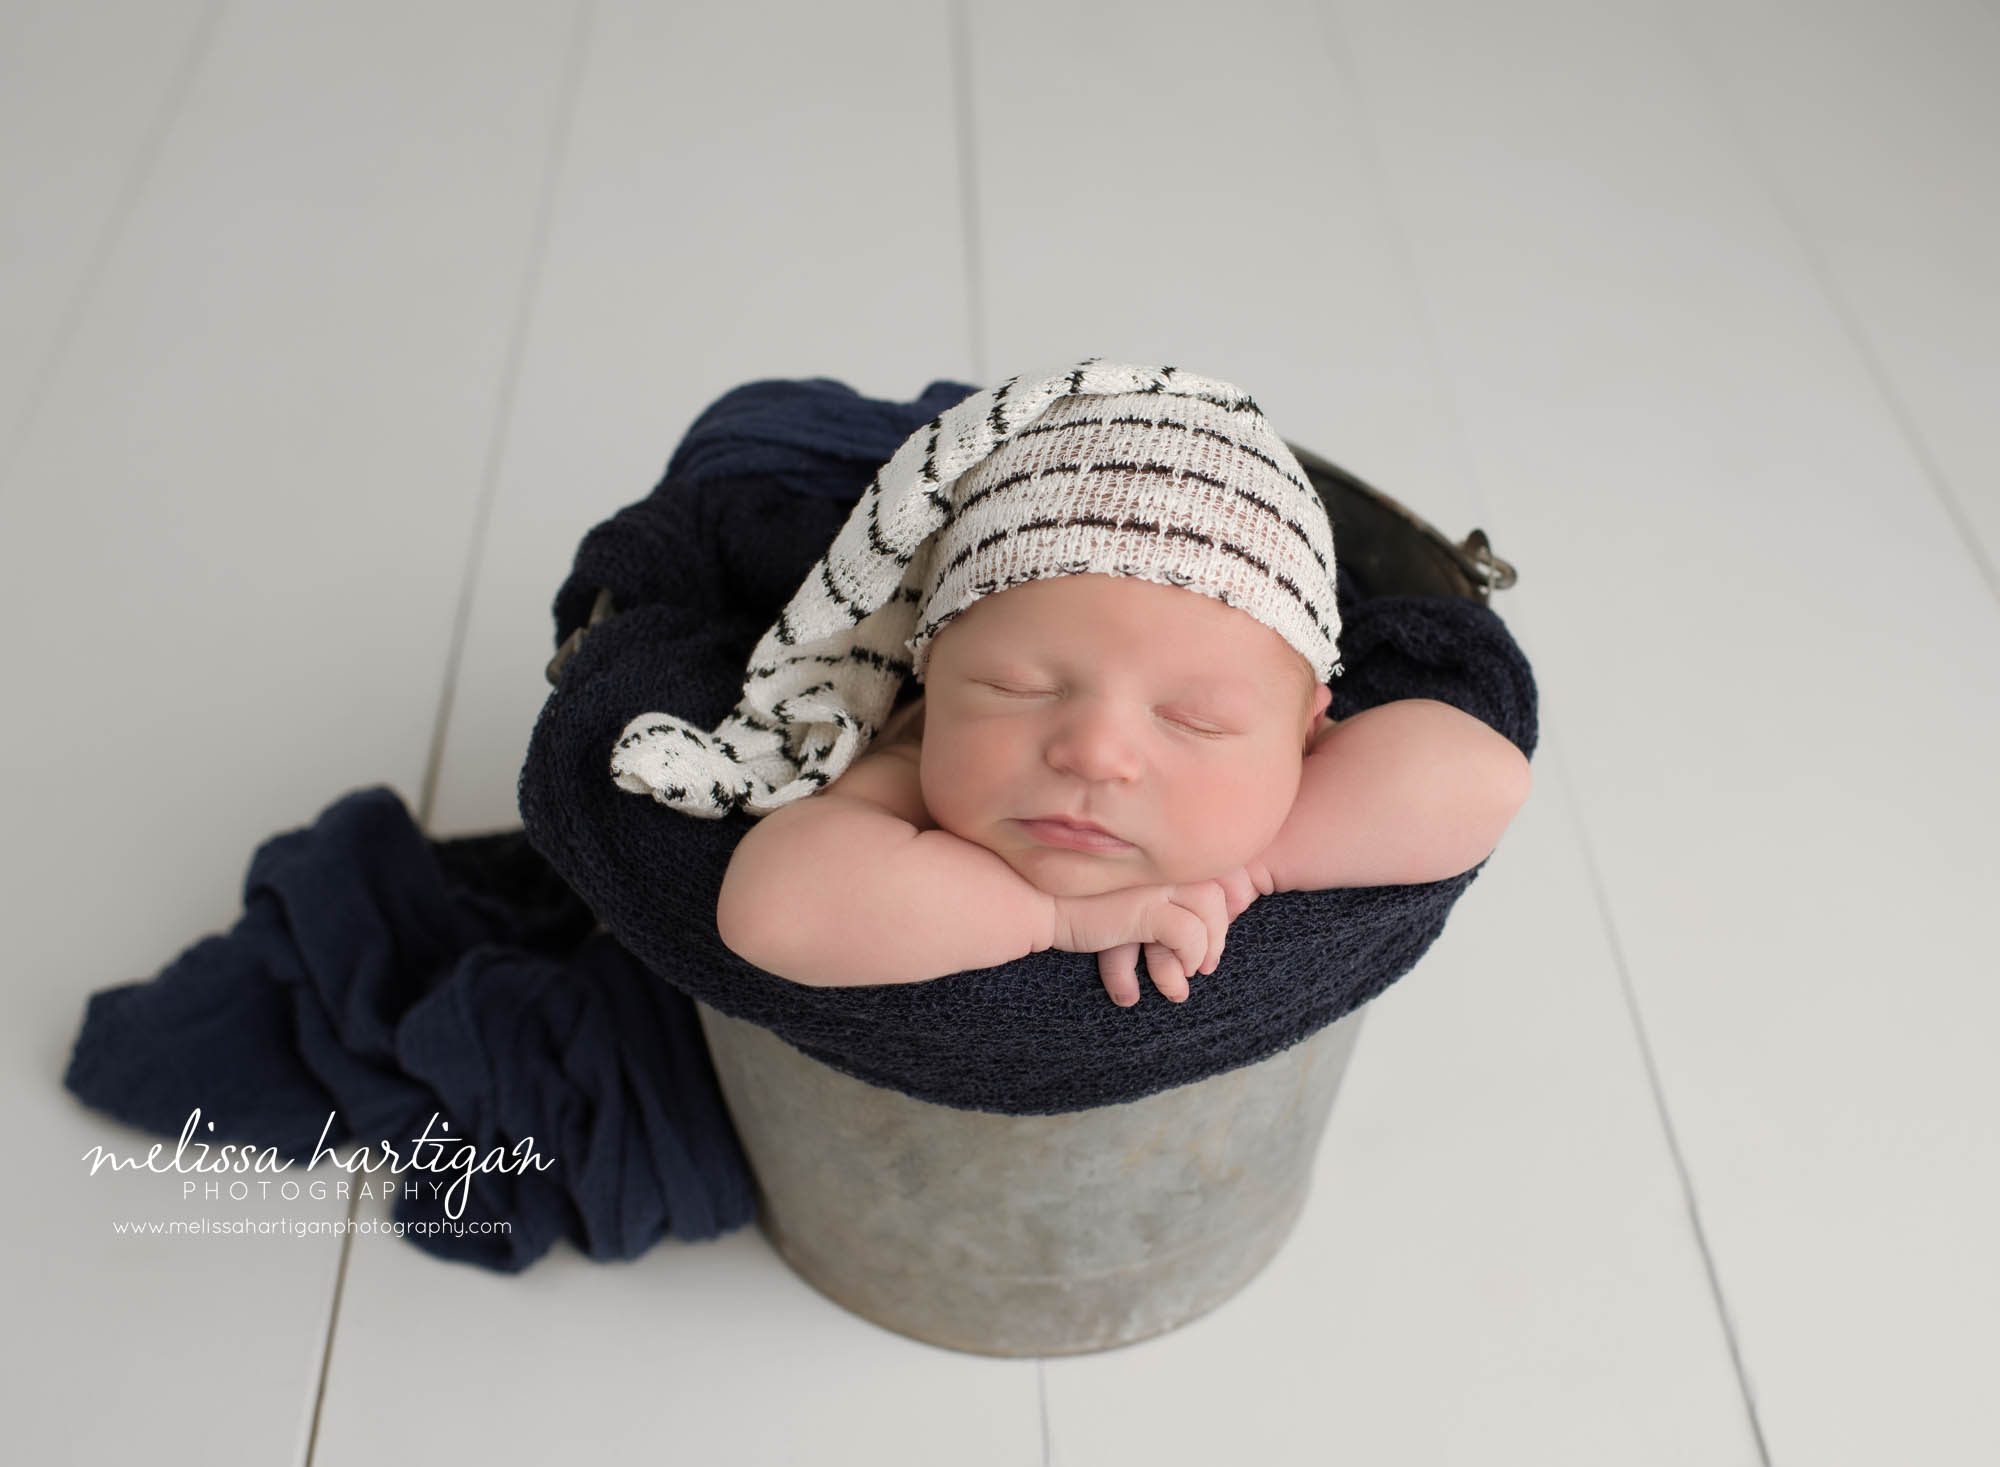 newborn baby boy posed in bucket with navy blue wrap and white and navy striped sleepy cap CT newborn Photography